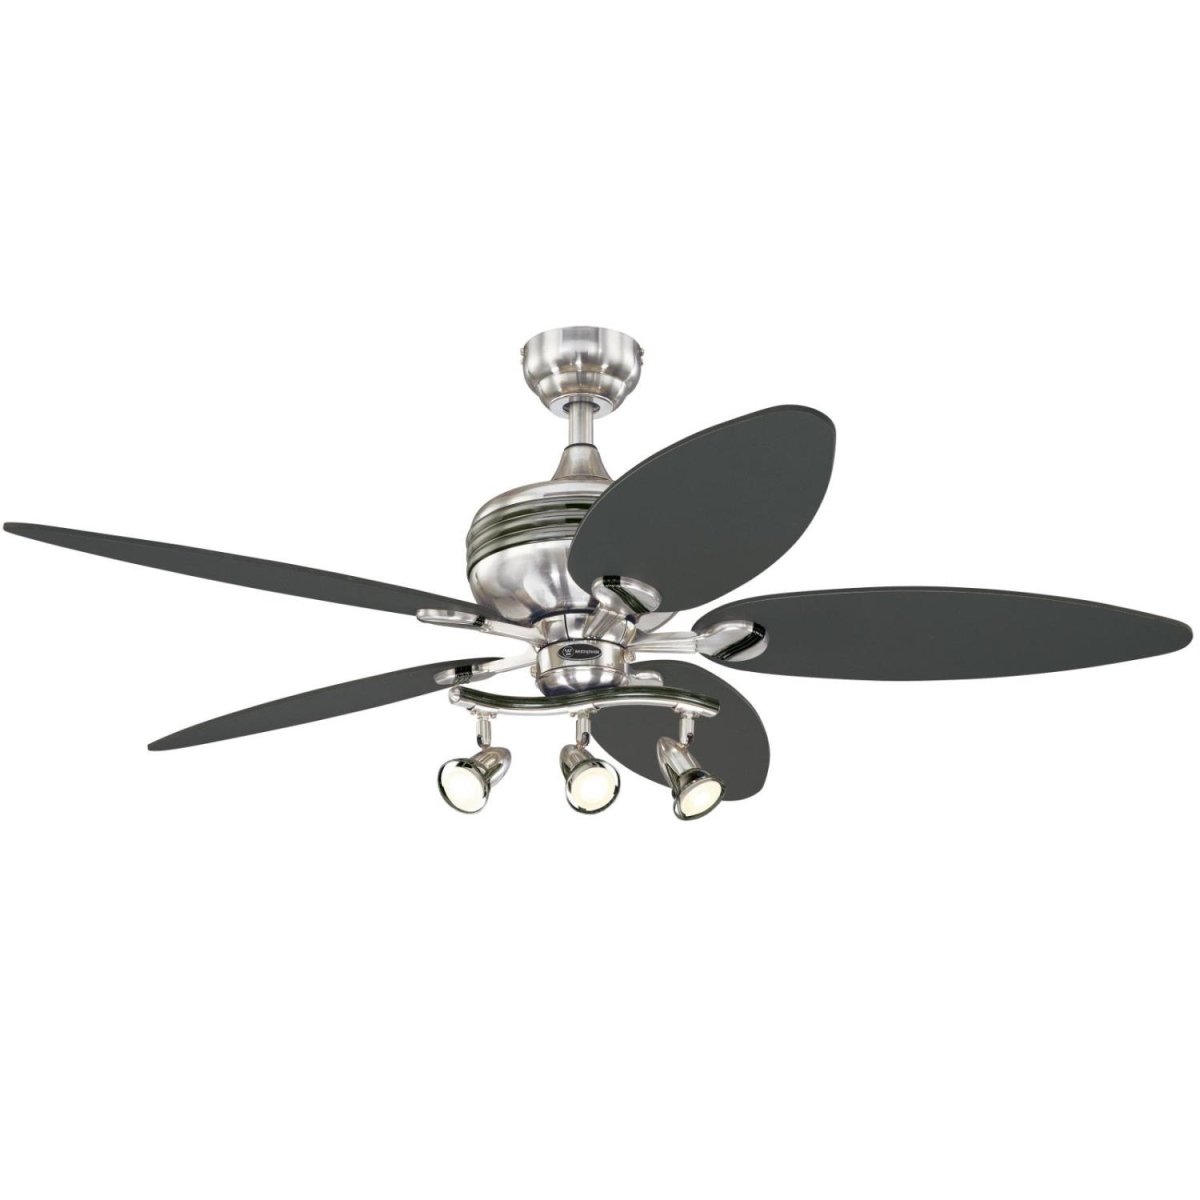 Picture of Westinghouse 7223100 52 in. Ceiling Fan with Dimmable LED Light Fixture Brushed Nickel Finish